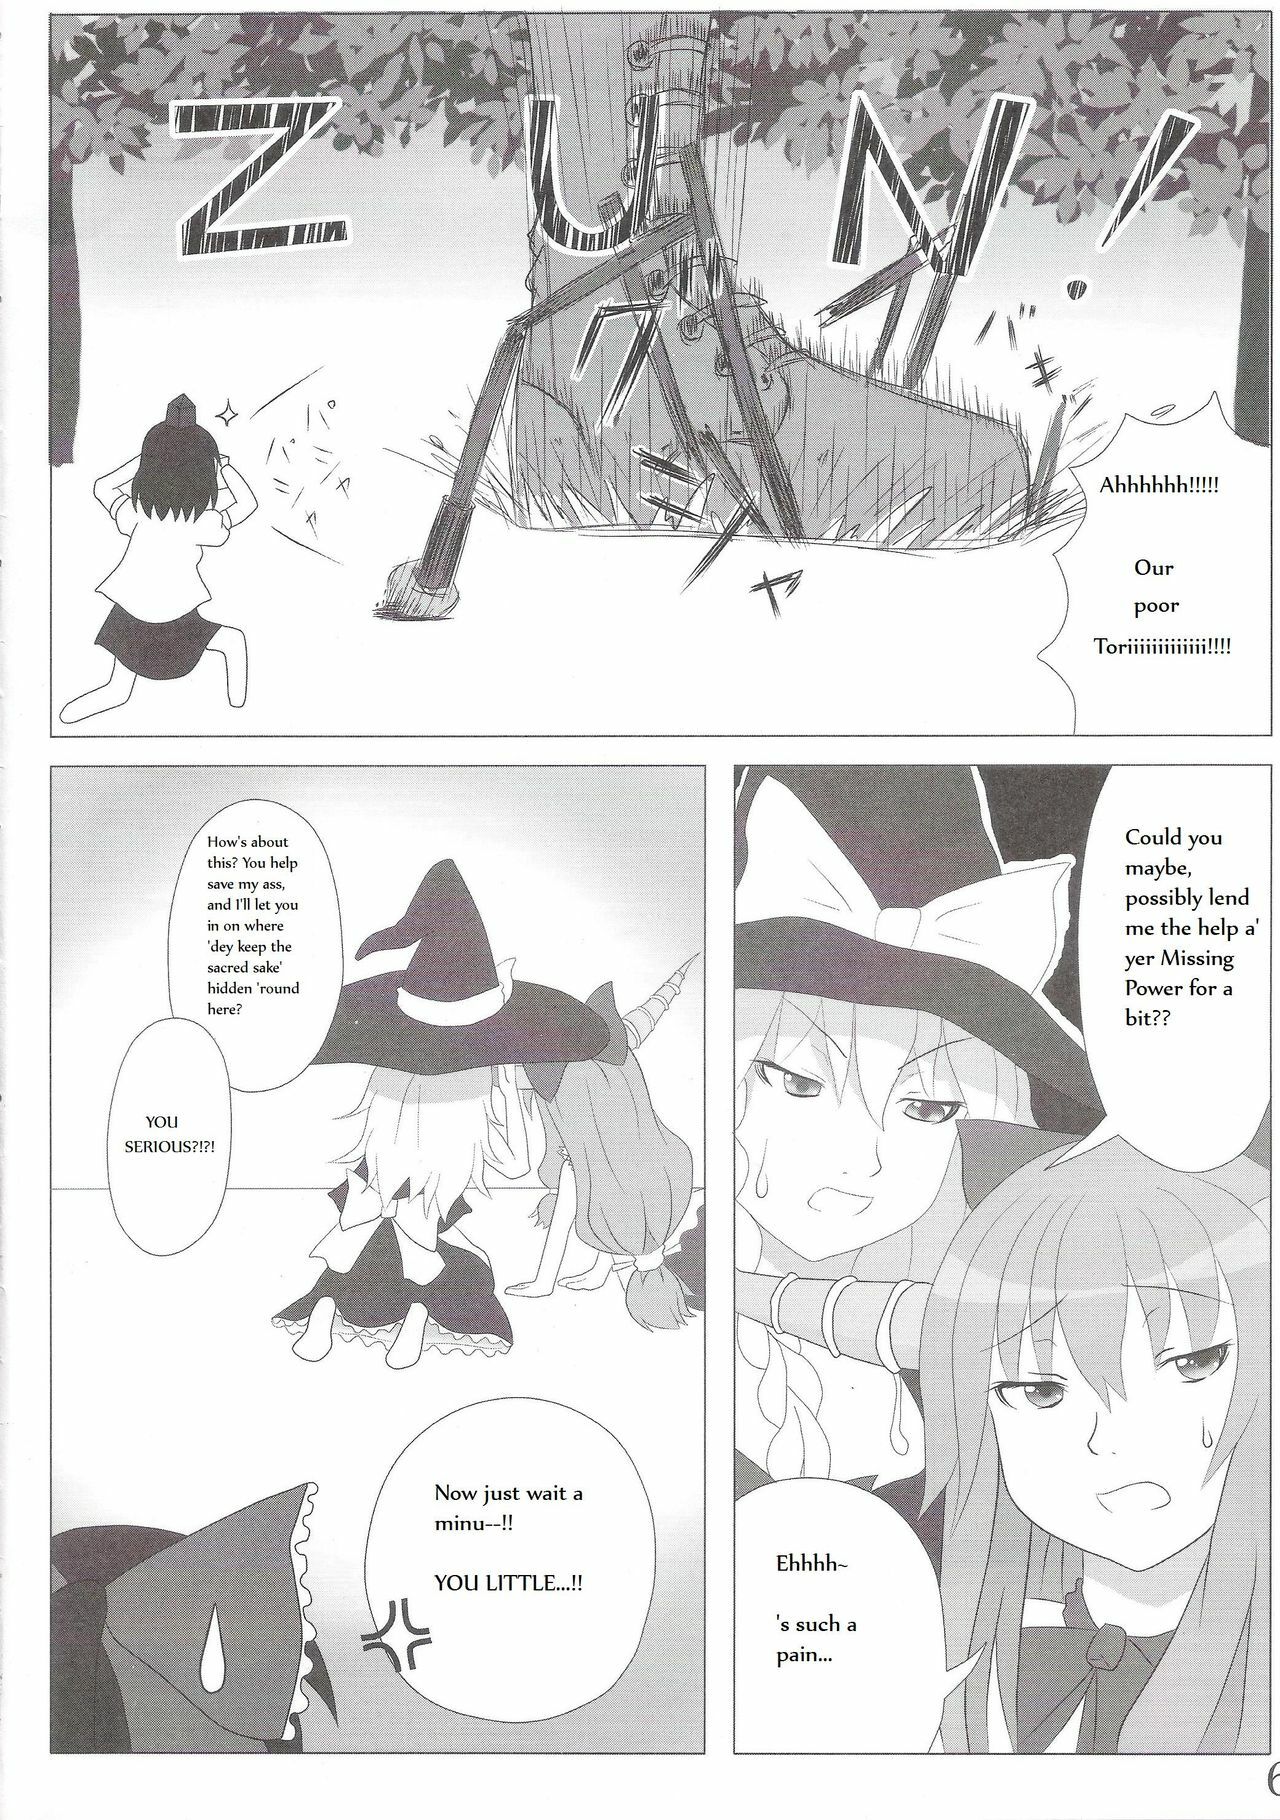 Touhou Super Dreadnaught (Magical) Girl English page 6 full